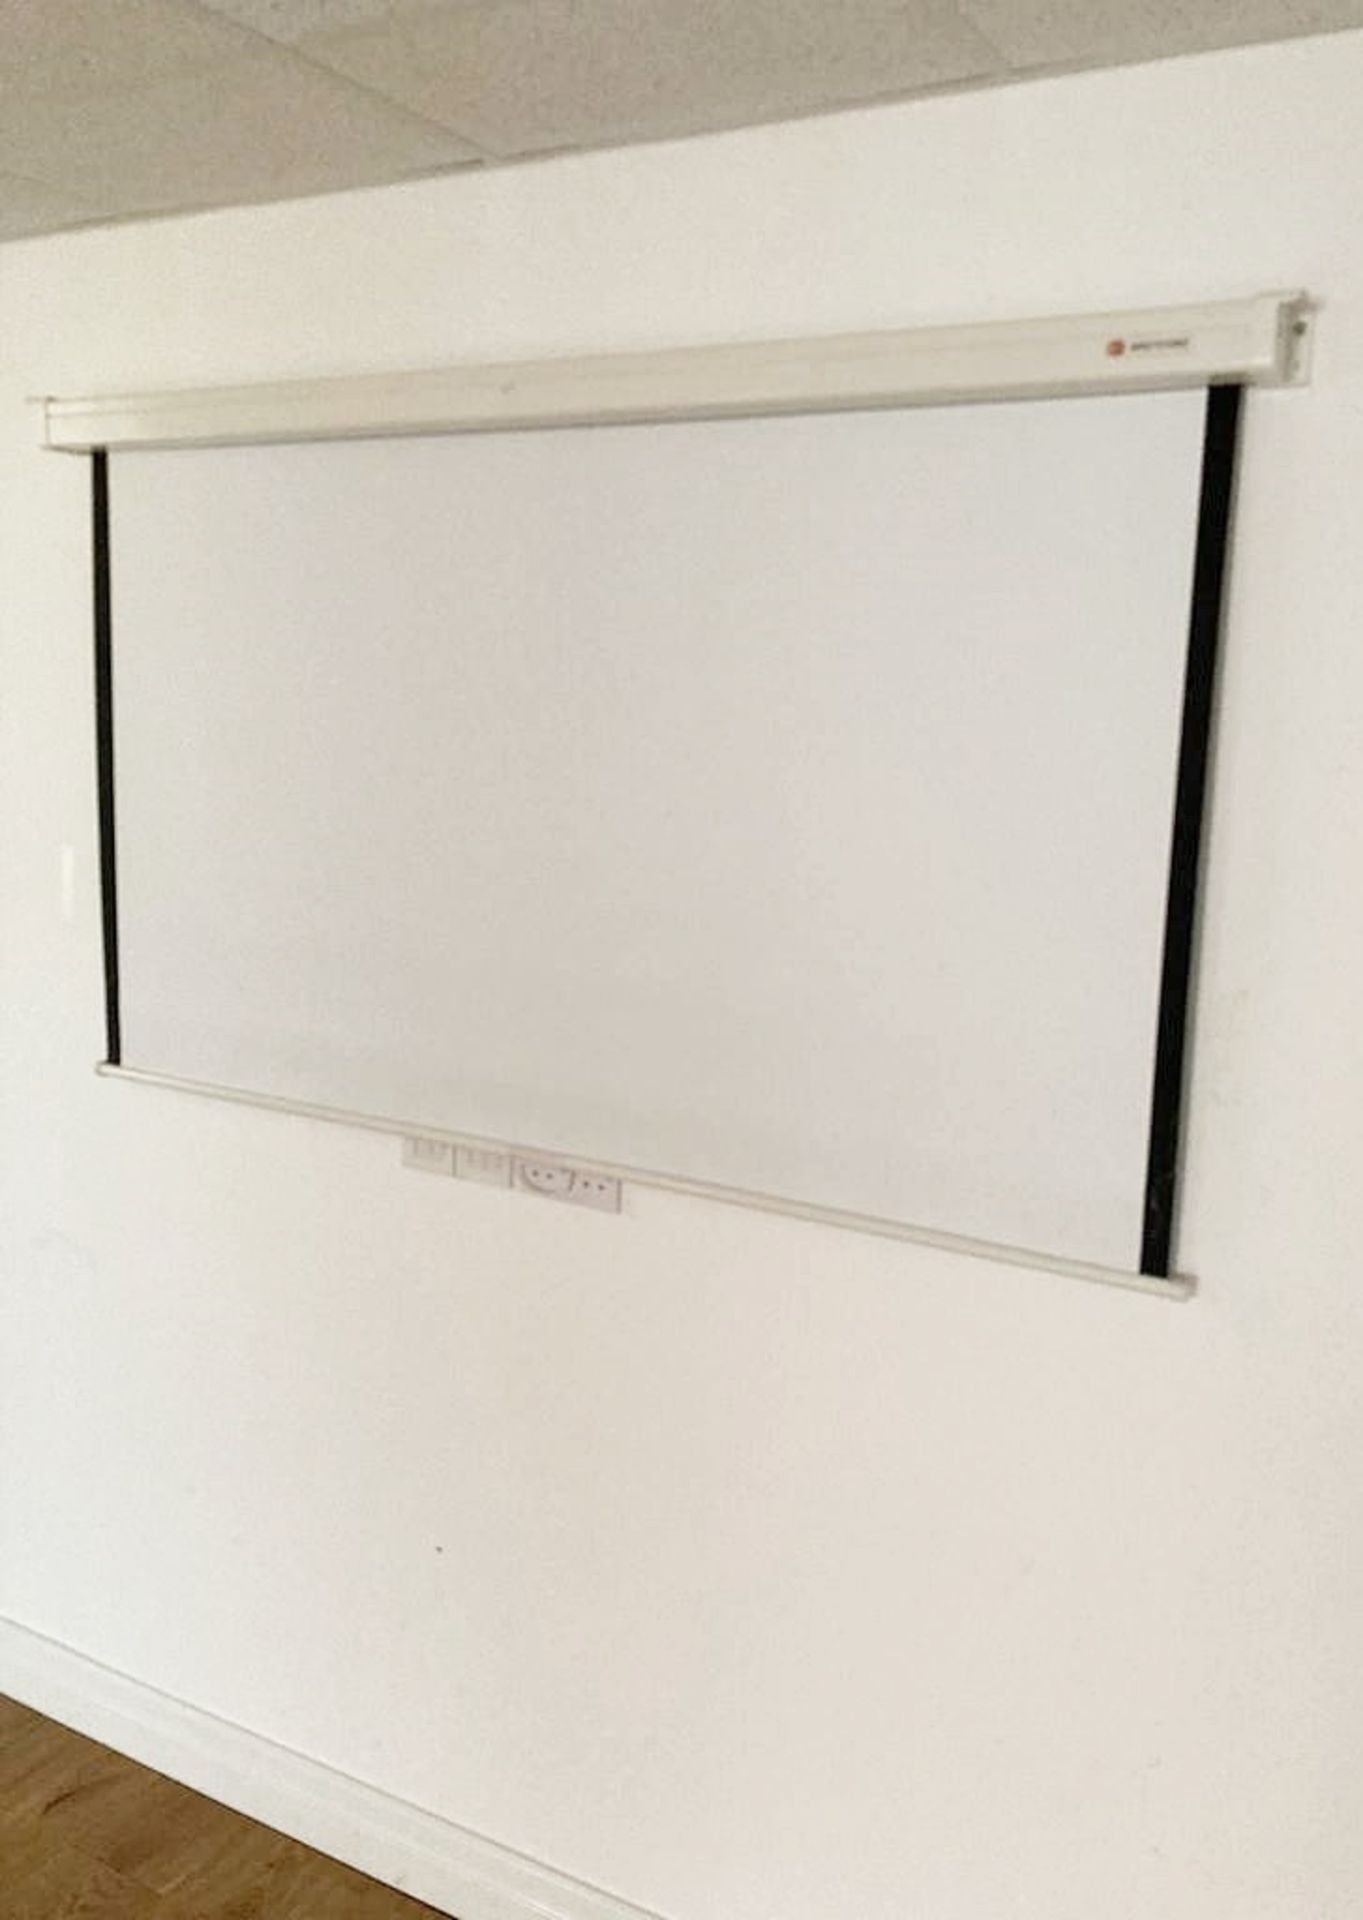 1 x Large 1.6 Metre Wide Projector Screen - Dimensions: H155 x W160 cm - To Be Removed From An